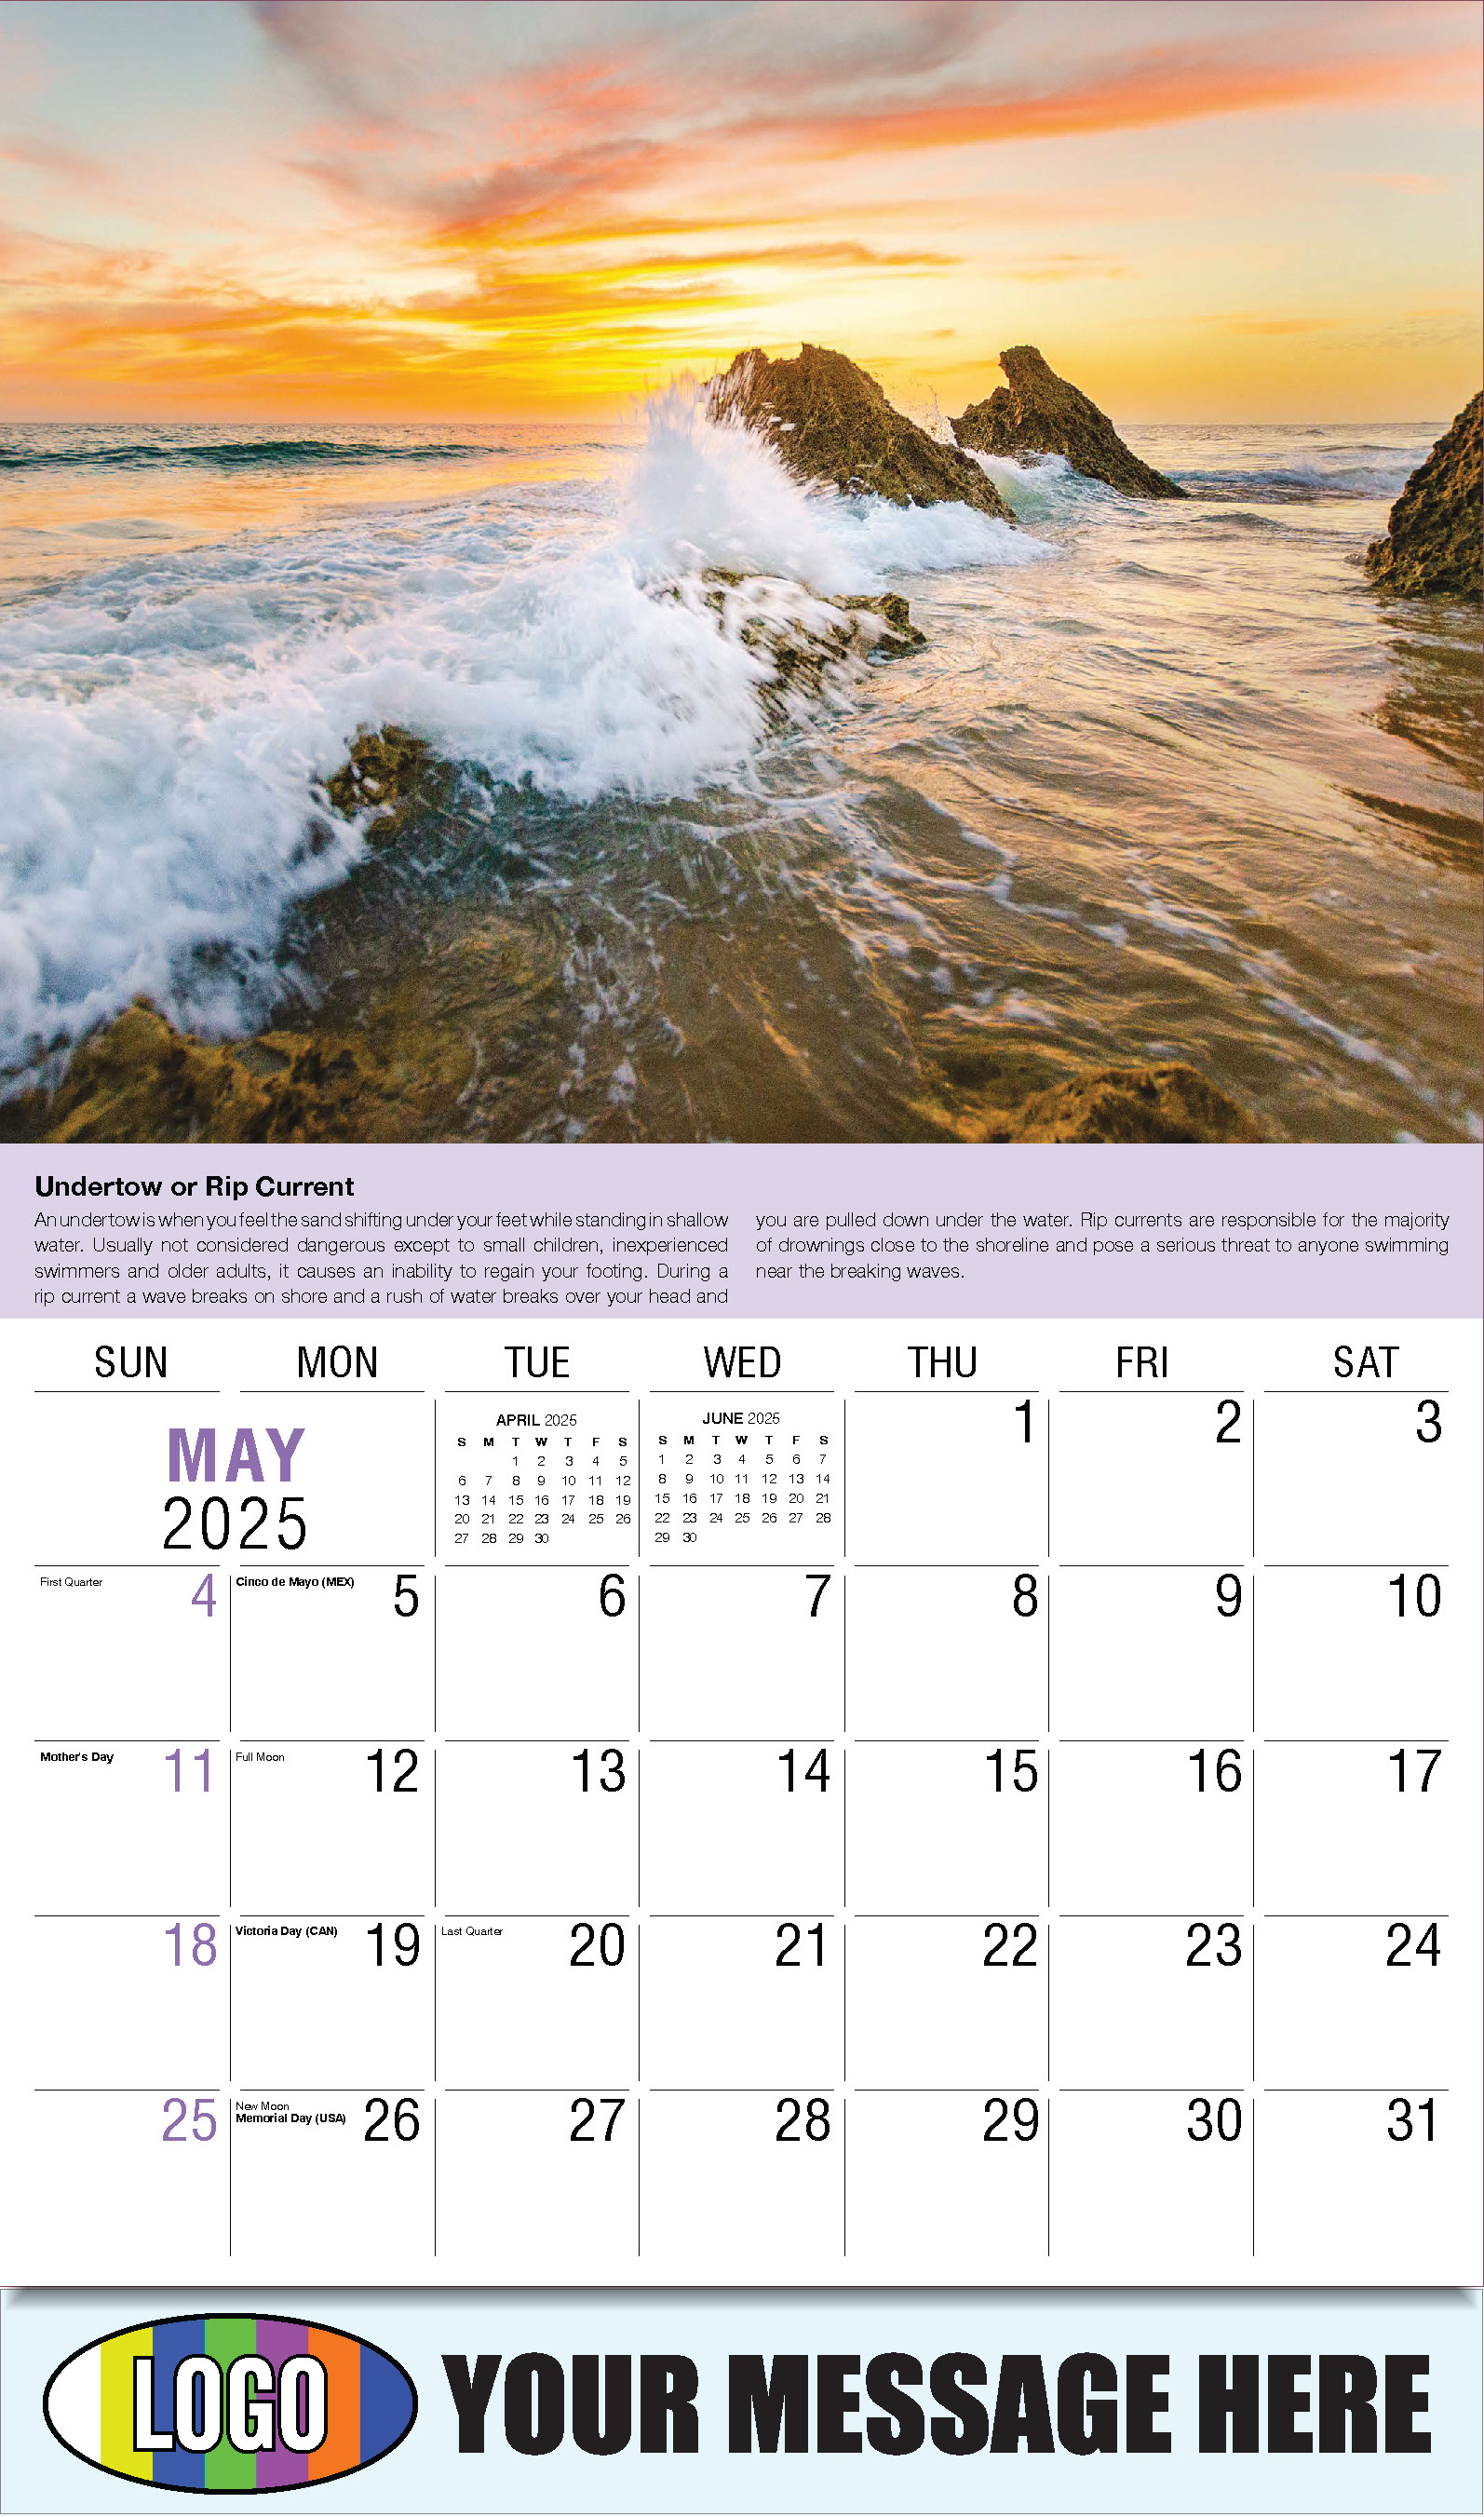 Planet Earth 2025 Business Promotional Wall Calendar - May